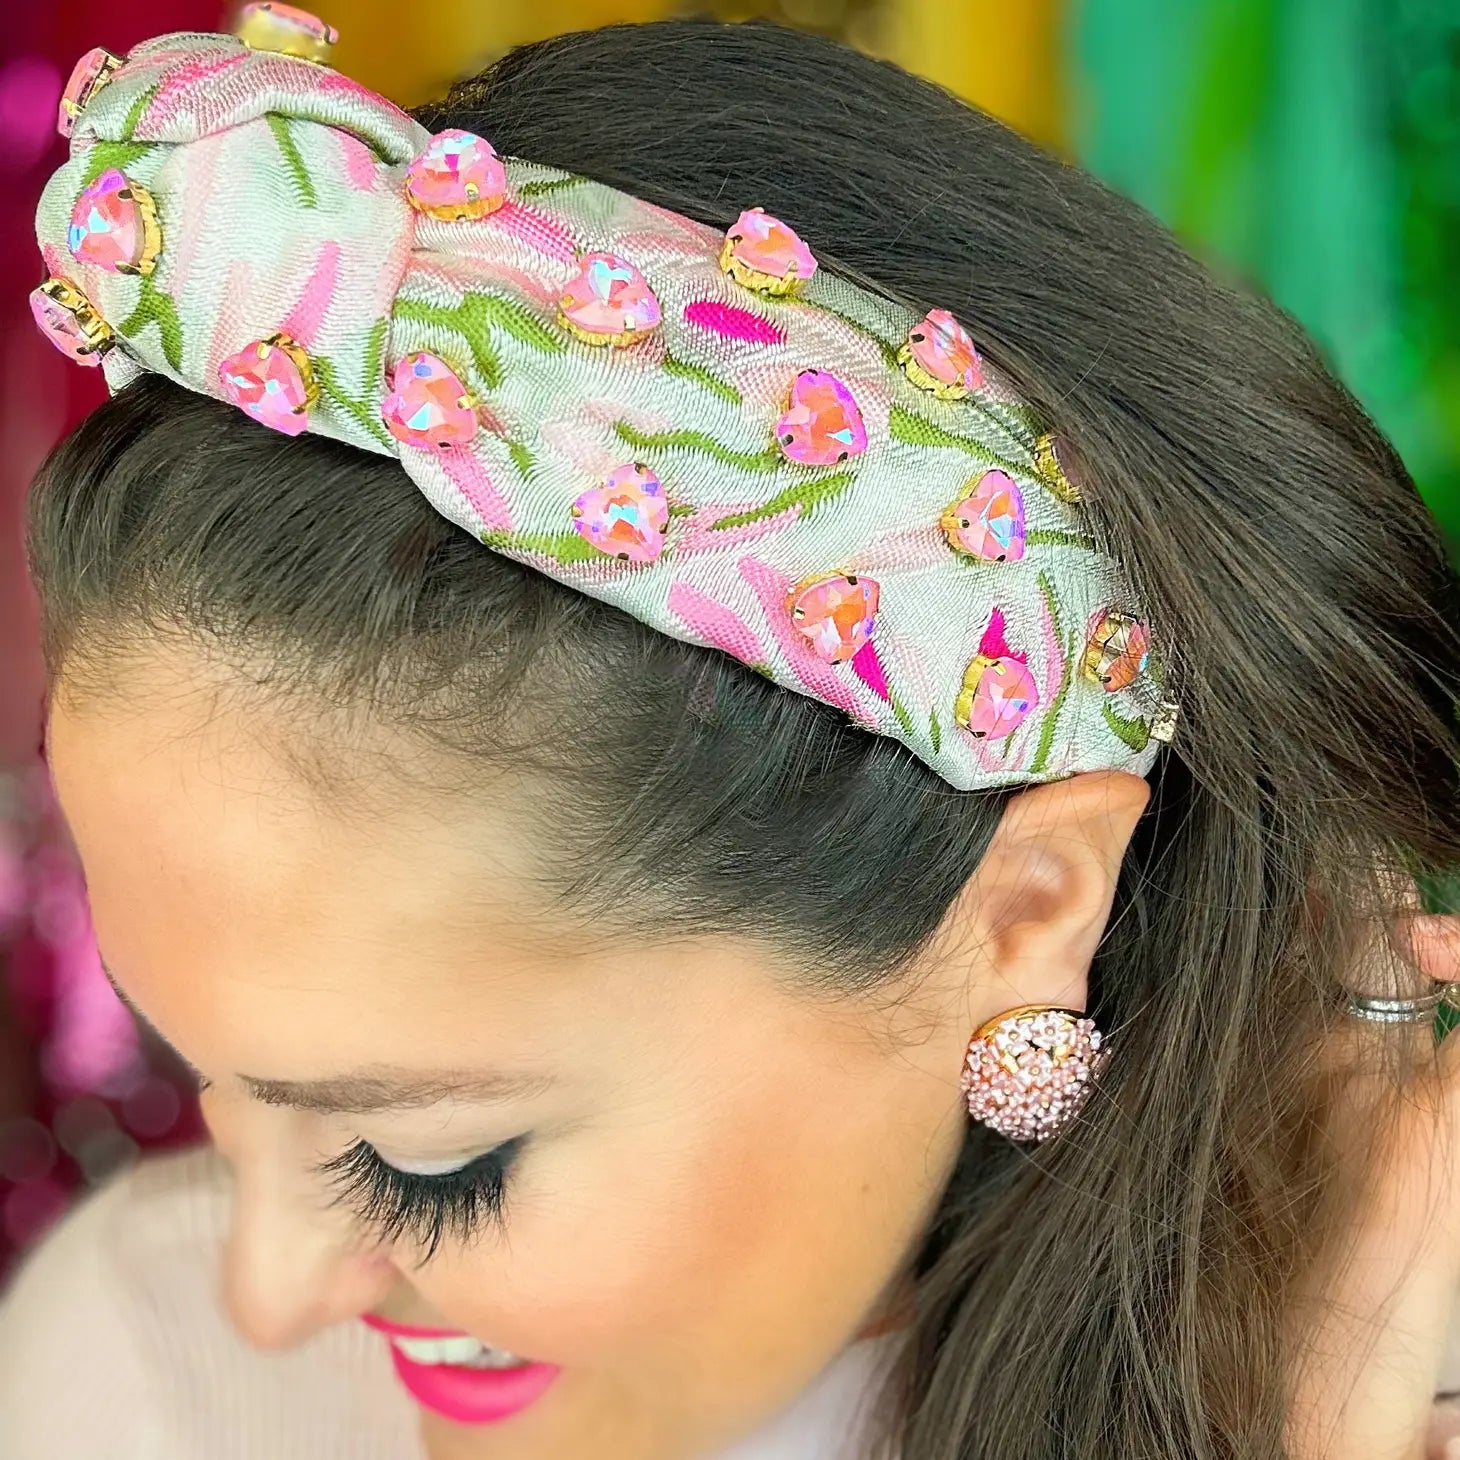 Garden Party Headband with Light Pink Heart Crystals by Brianna Cannon